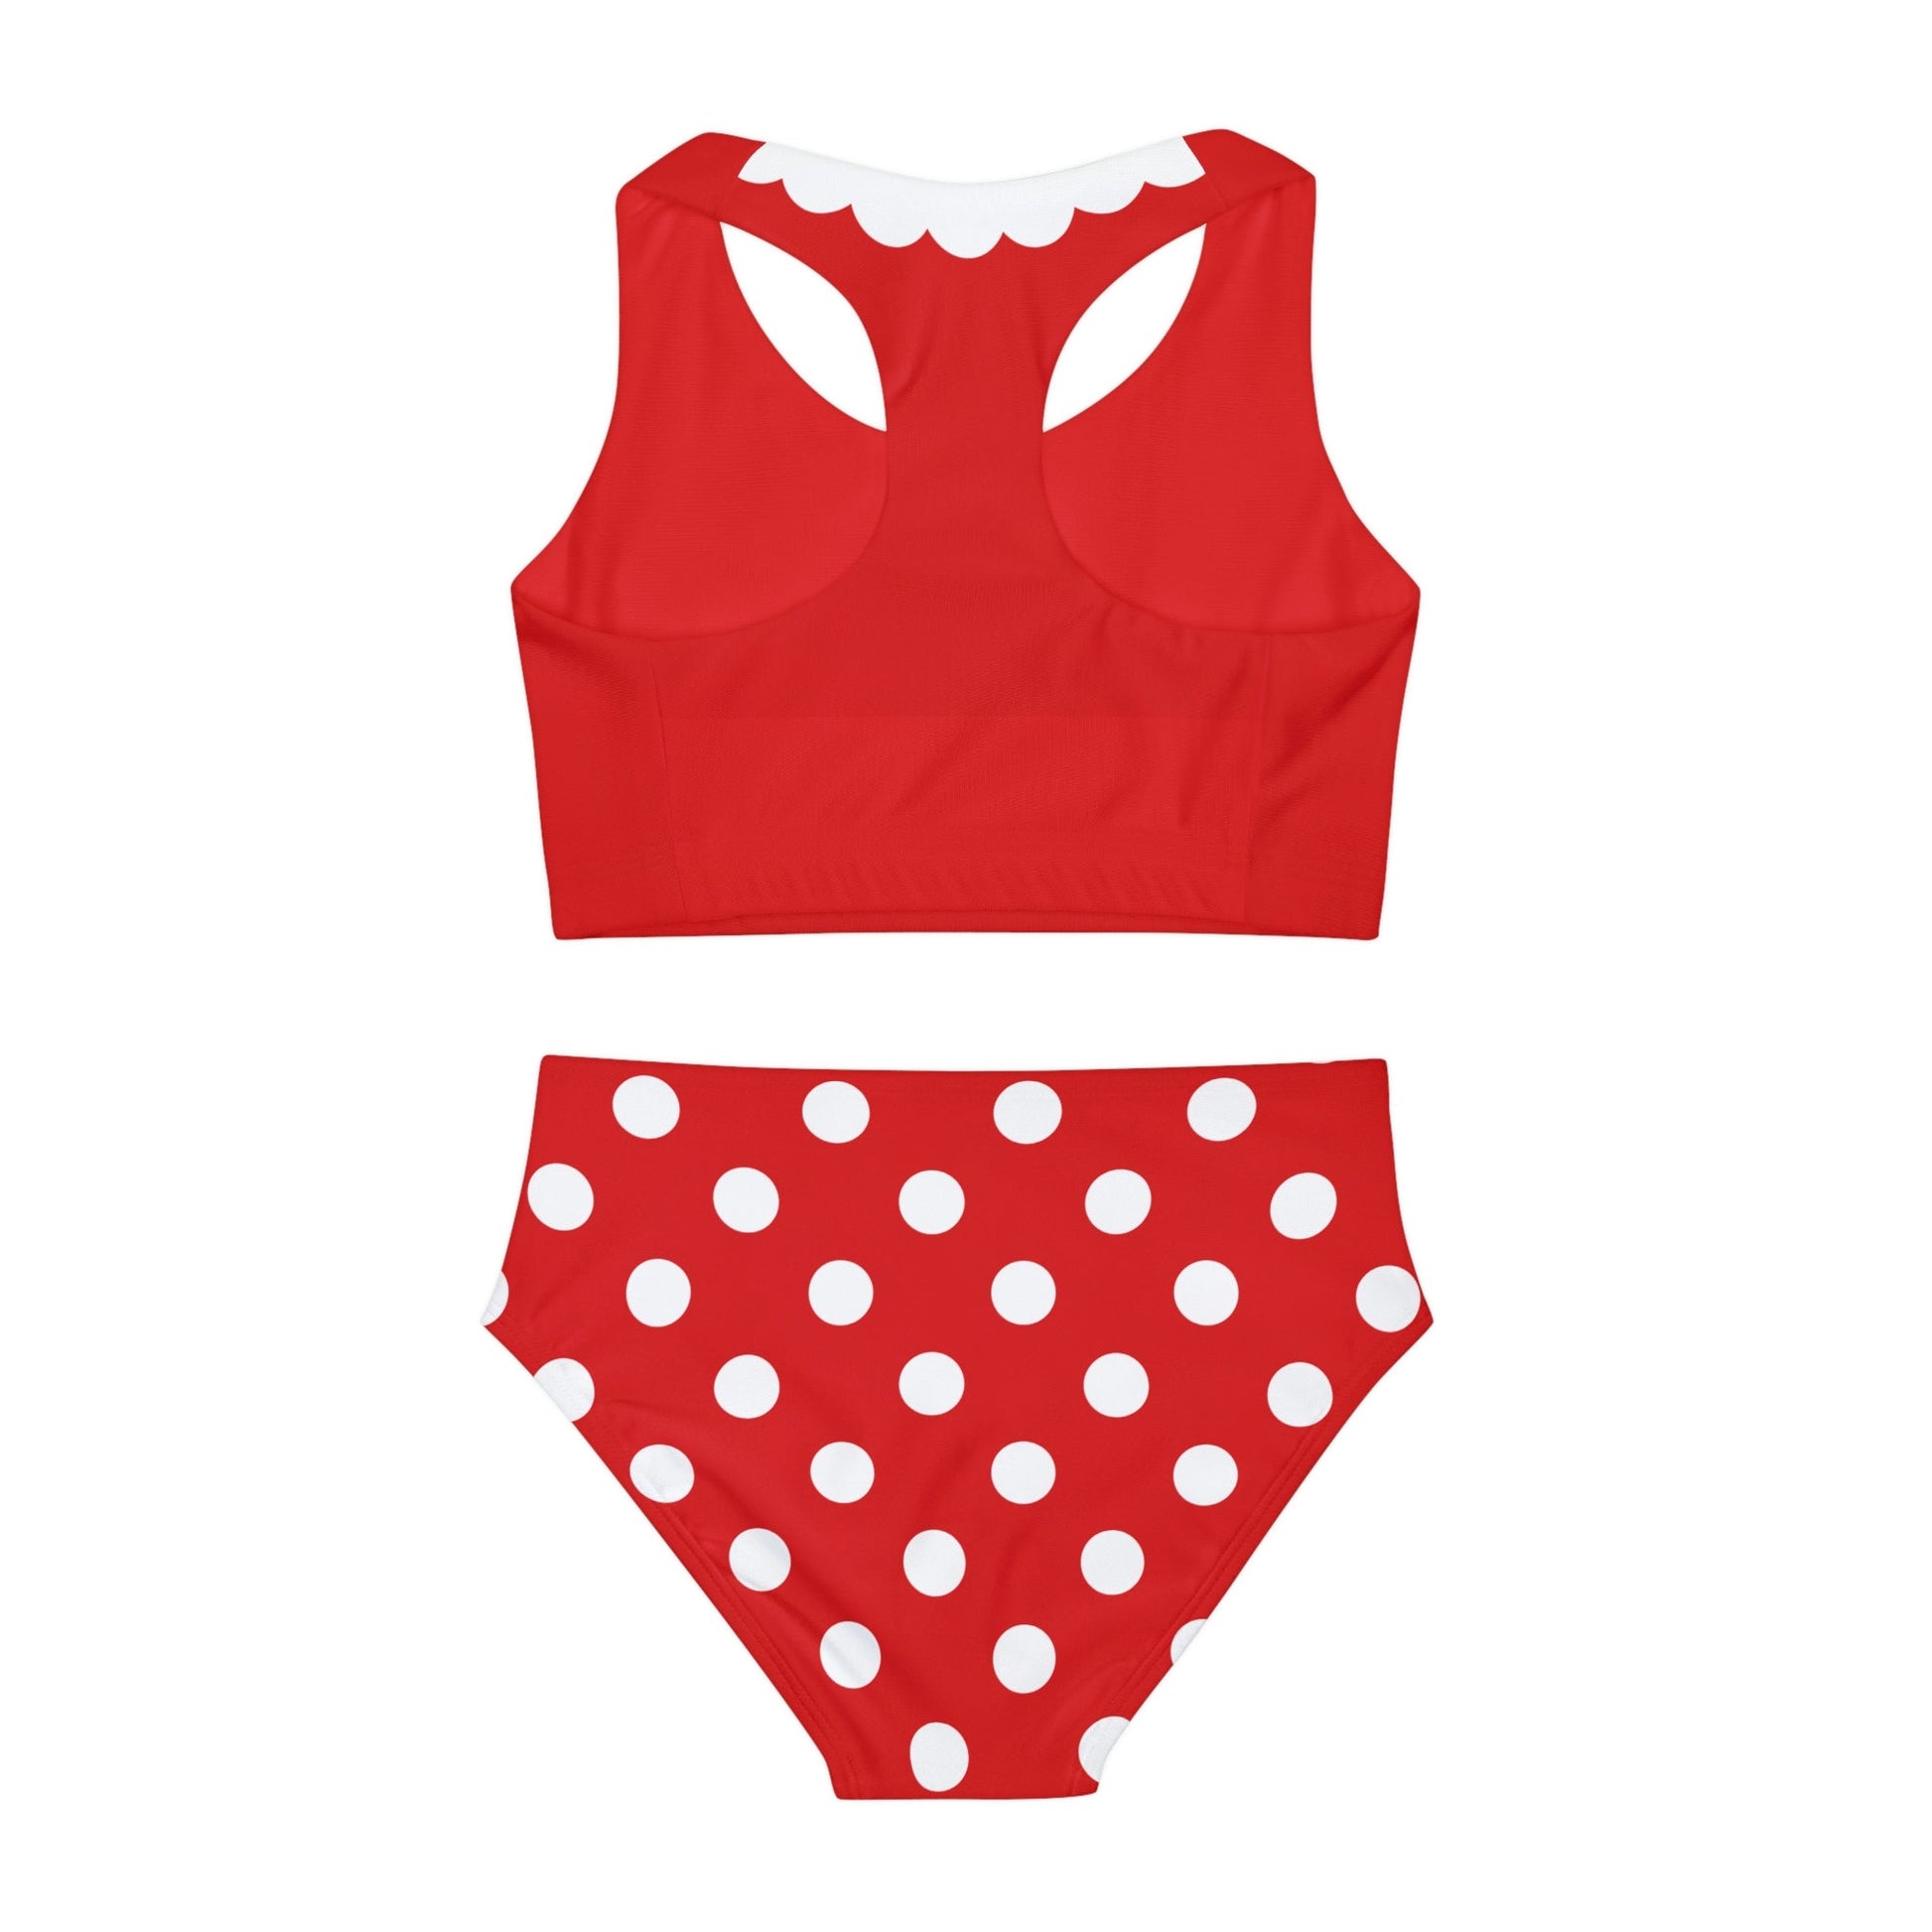 Ms. Mouse Girls Two Piece Swimsuit All Over PrintAOPAOP Clothing#tag4##tag5##tag6#